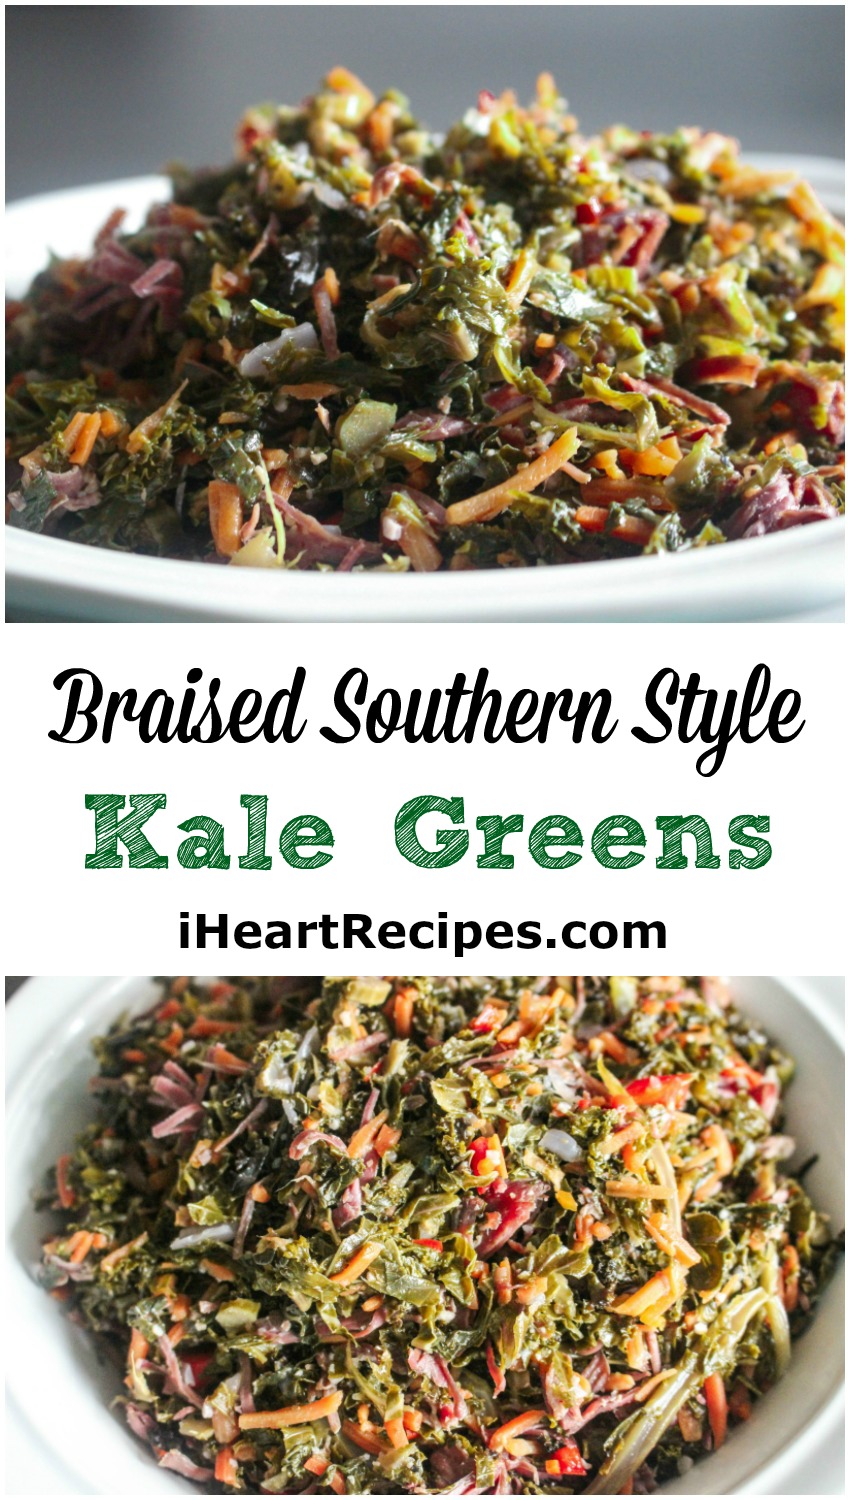 Braised Southern Style Kale I Heart Recipes